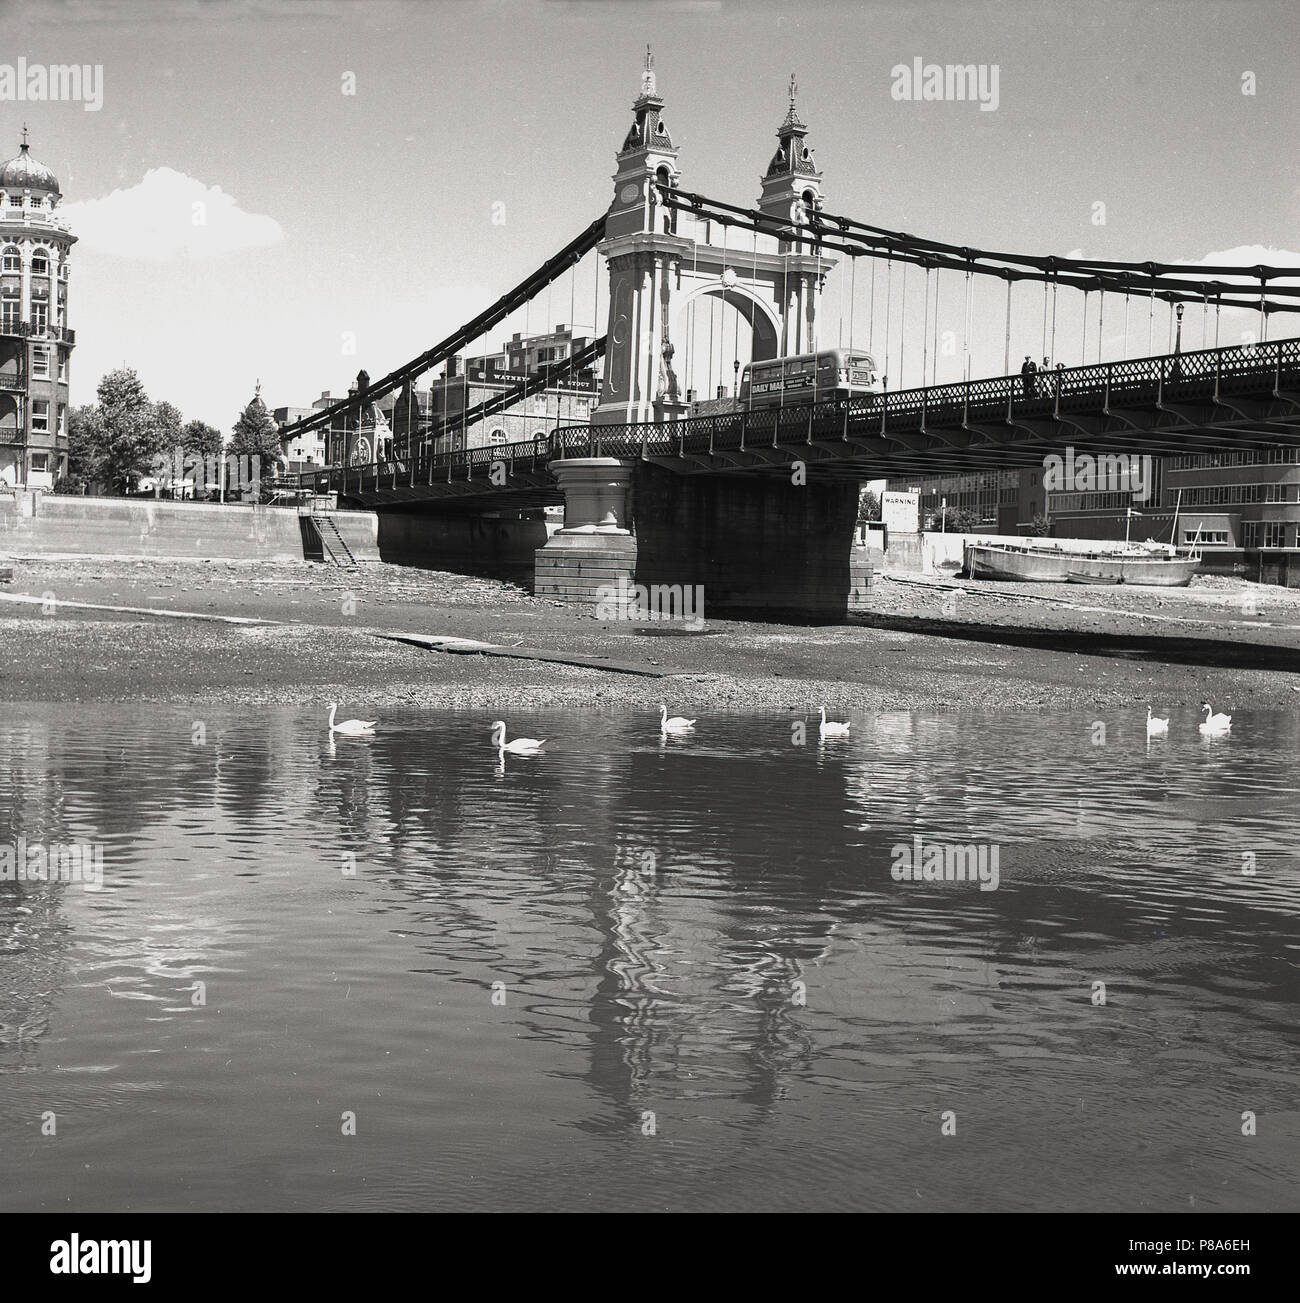 1950s, historical, Hammersmith Bridge, a view of the bridge on the Hammersmith riverside end. The bridge, which links the north side of the Thames to the south side, was the first suspension bridge over the River Thames when construction started in 1824. The bridge seen here is the second - replacement - one, built in 1887, which rests on the same pier foundations as the first. It was never designed to carry the weight and volume of road traffic which now exists in this part of inner London. Stock Photo